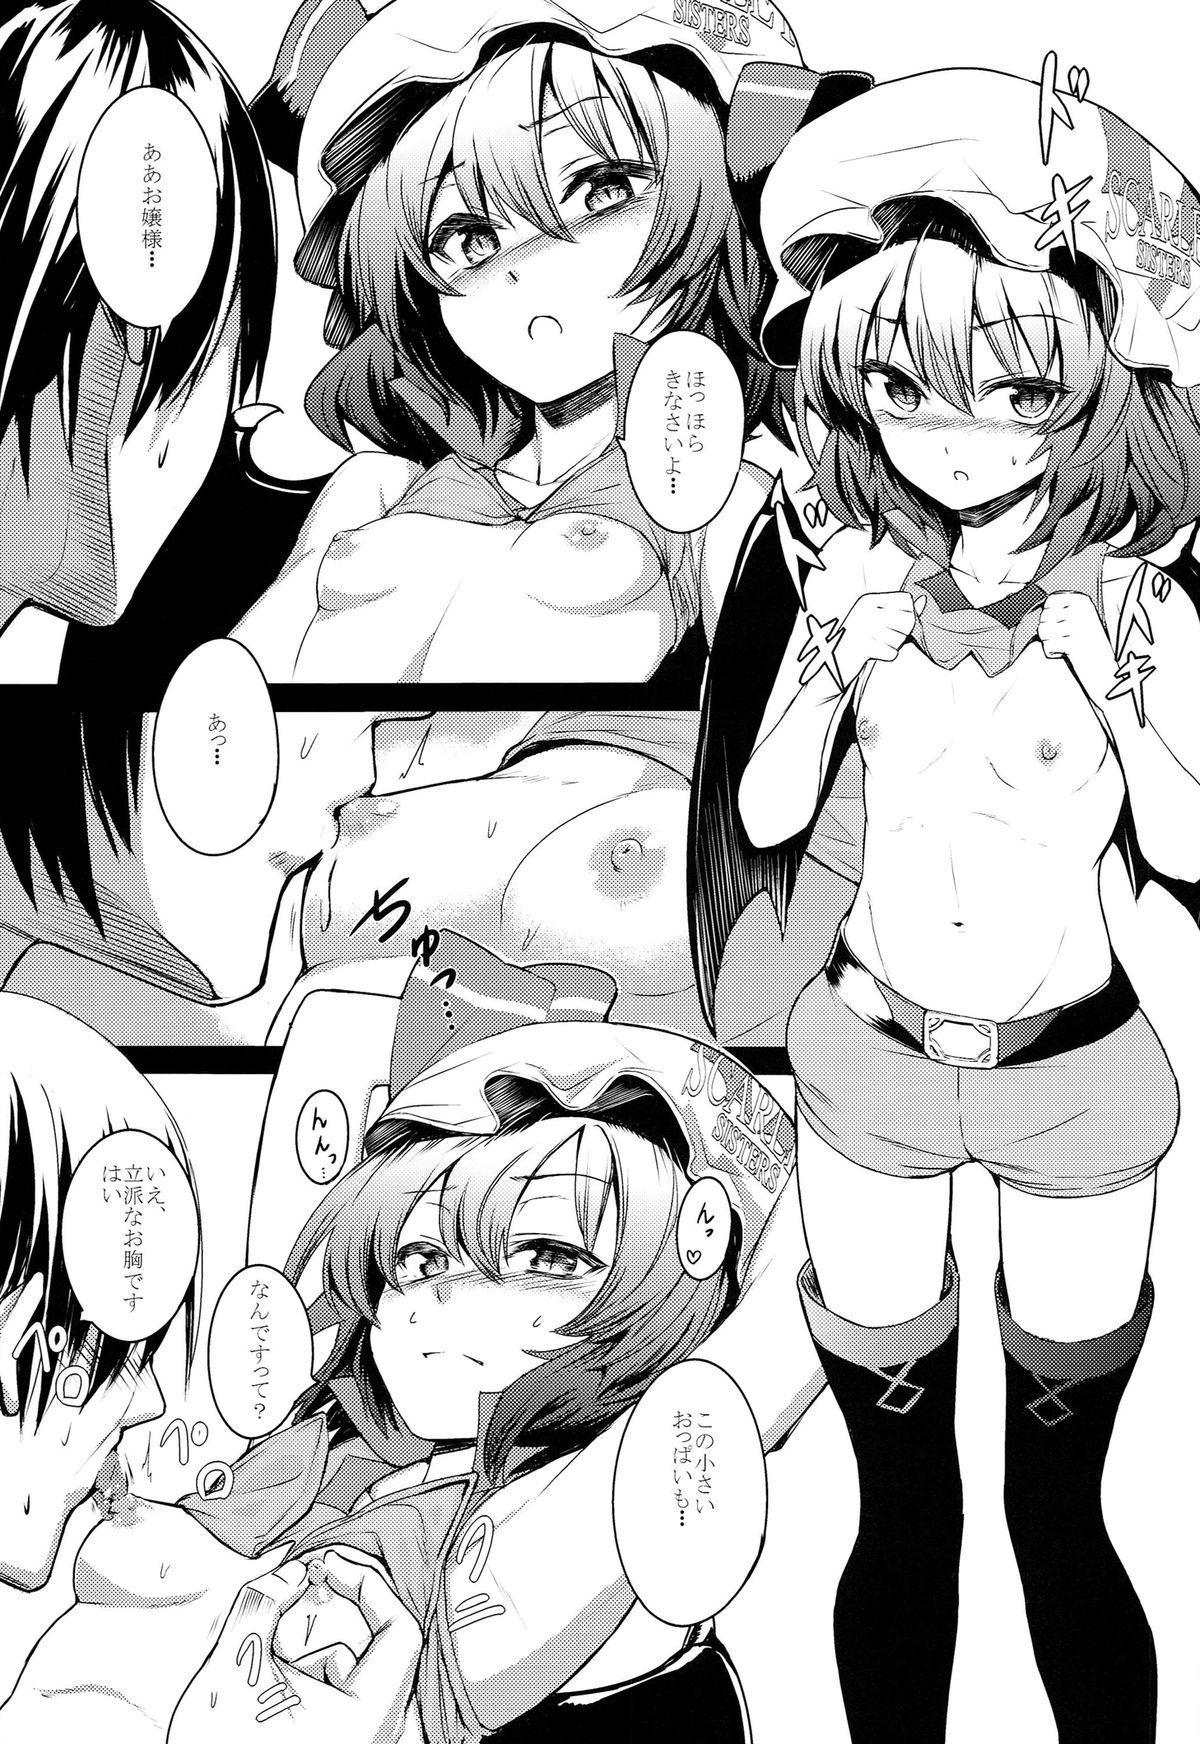 Nipple TOUHOU RACE QUEENS COLLABO CLUB - Touhou project Sapphic Erotica - Page 6